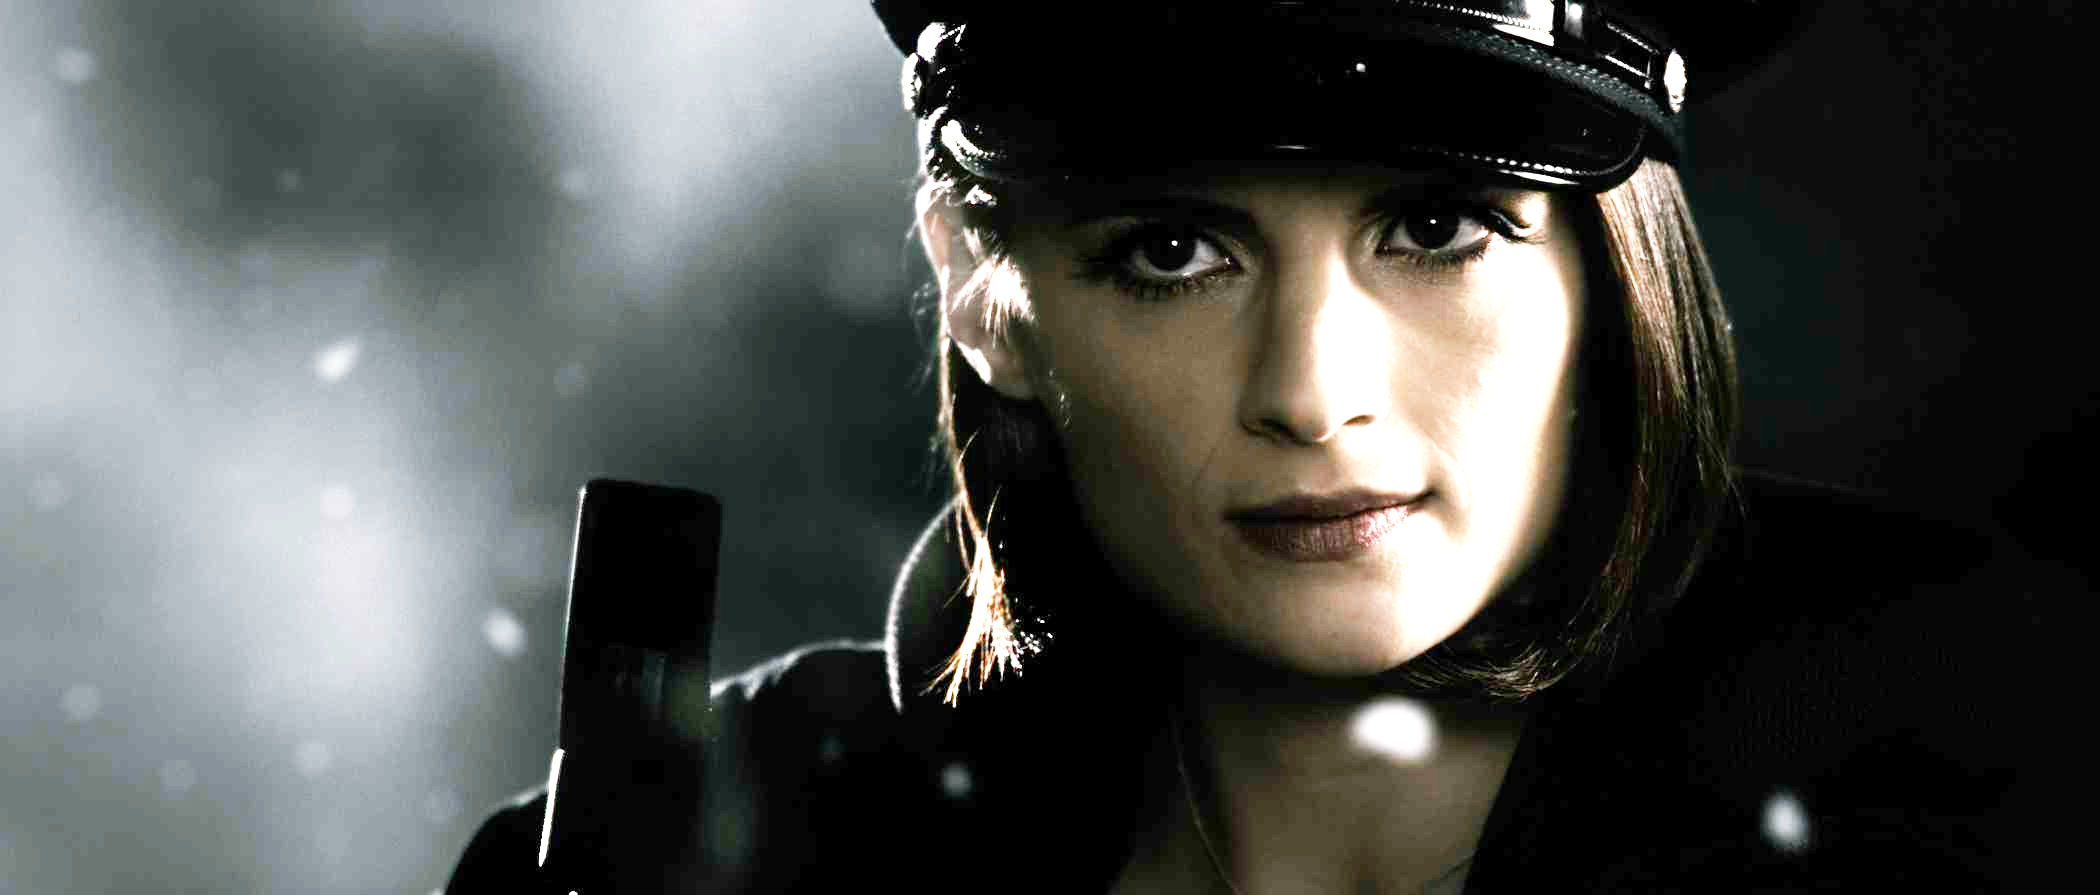 Stana Katic stars as Morgenstern in Lions Gate Films' The Spirit (2008)